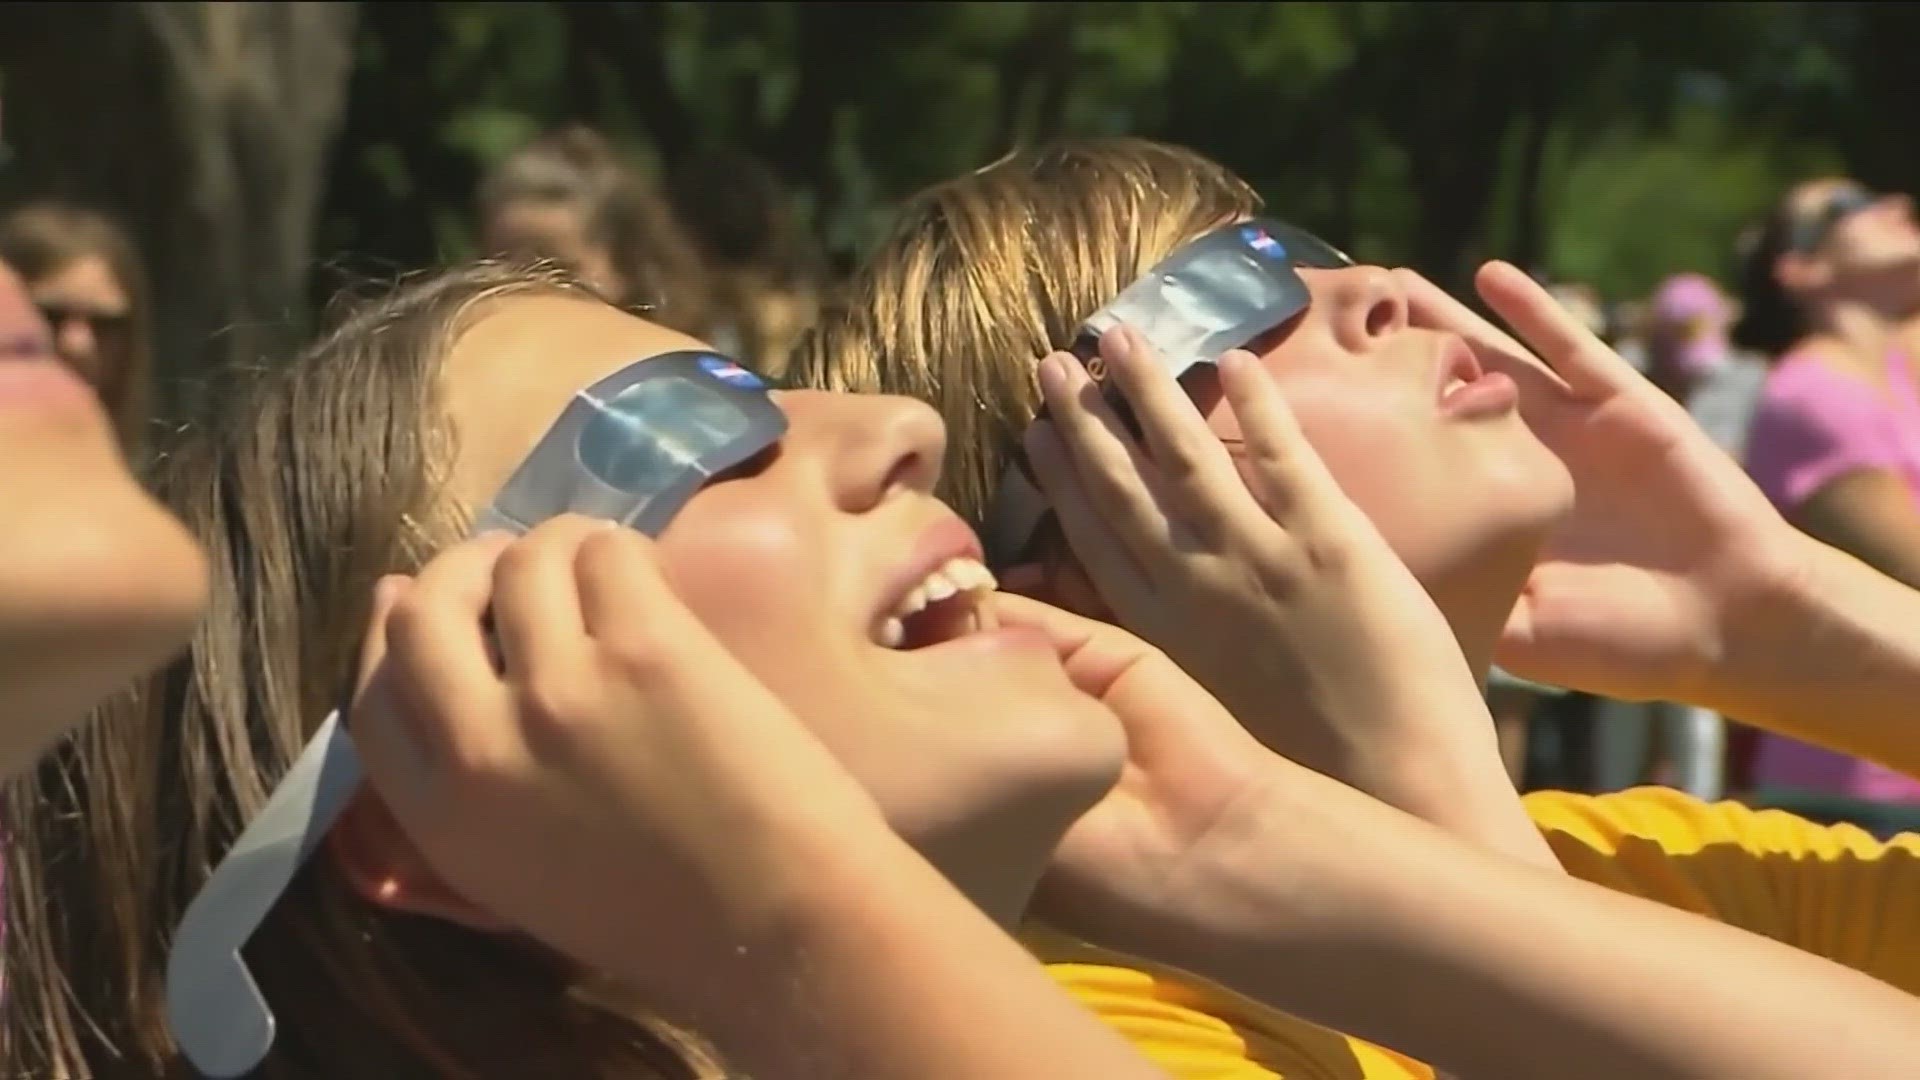 A professor of ophthalmology at UC San Diego Health explains the irreversible damage that can be done if you stare at the sun or partial eclipse with the naked eye.